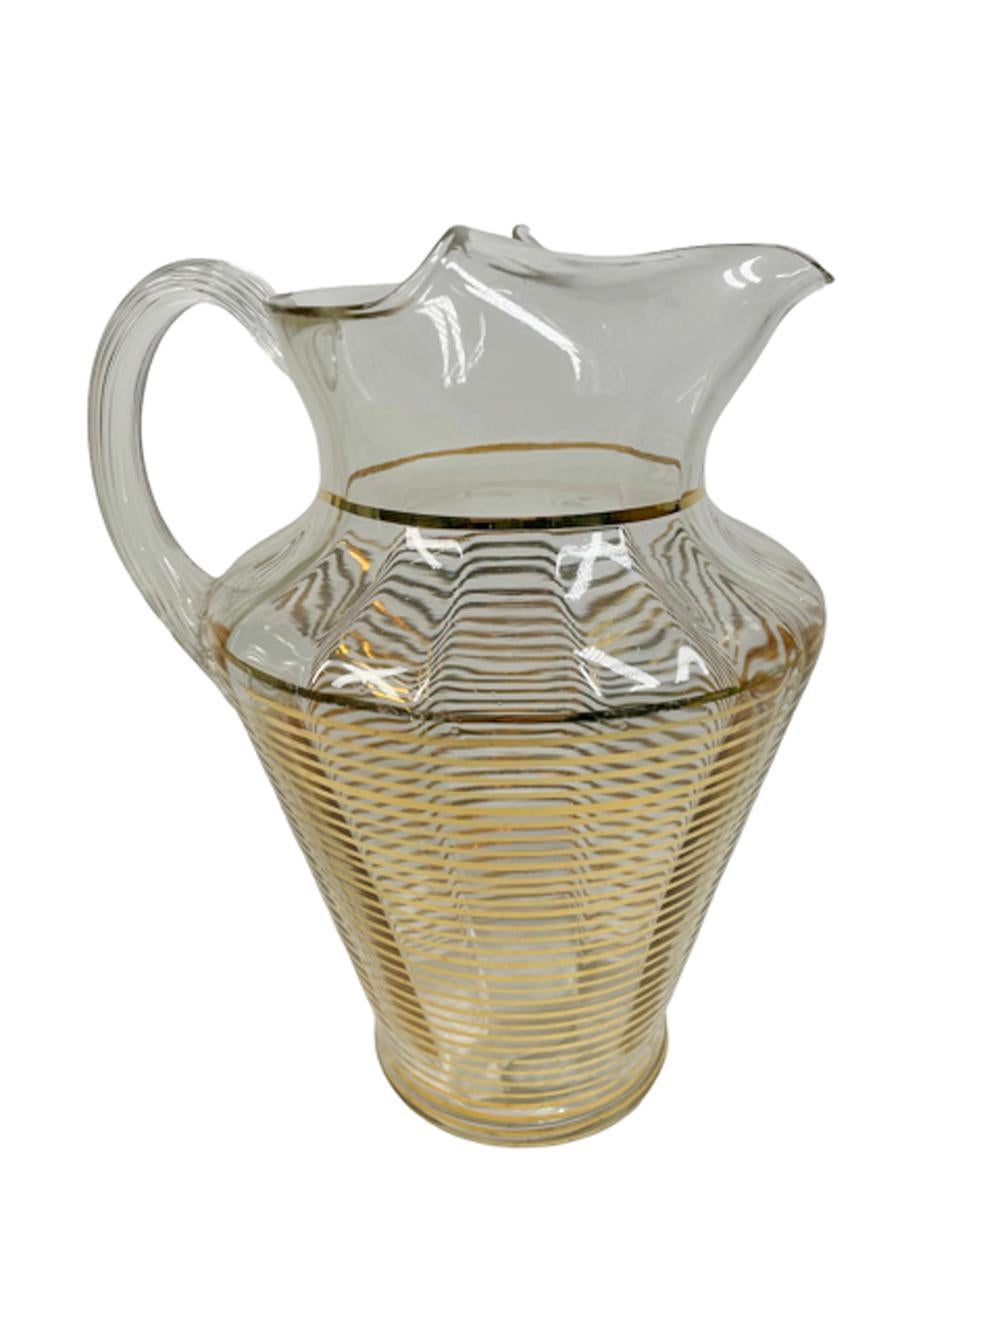 Art Deco water or bar pitcher of optically ribbed clear glass with narrow gold bands from the foot to the shoulder and an applied  reeded glass handle, the mouth of the pitcher is molded with an integral ice dam at the spout.